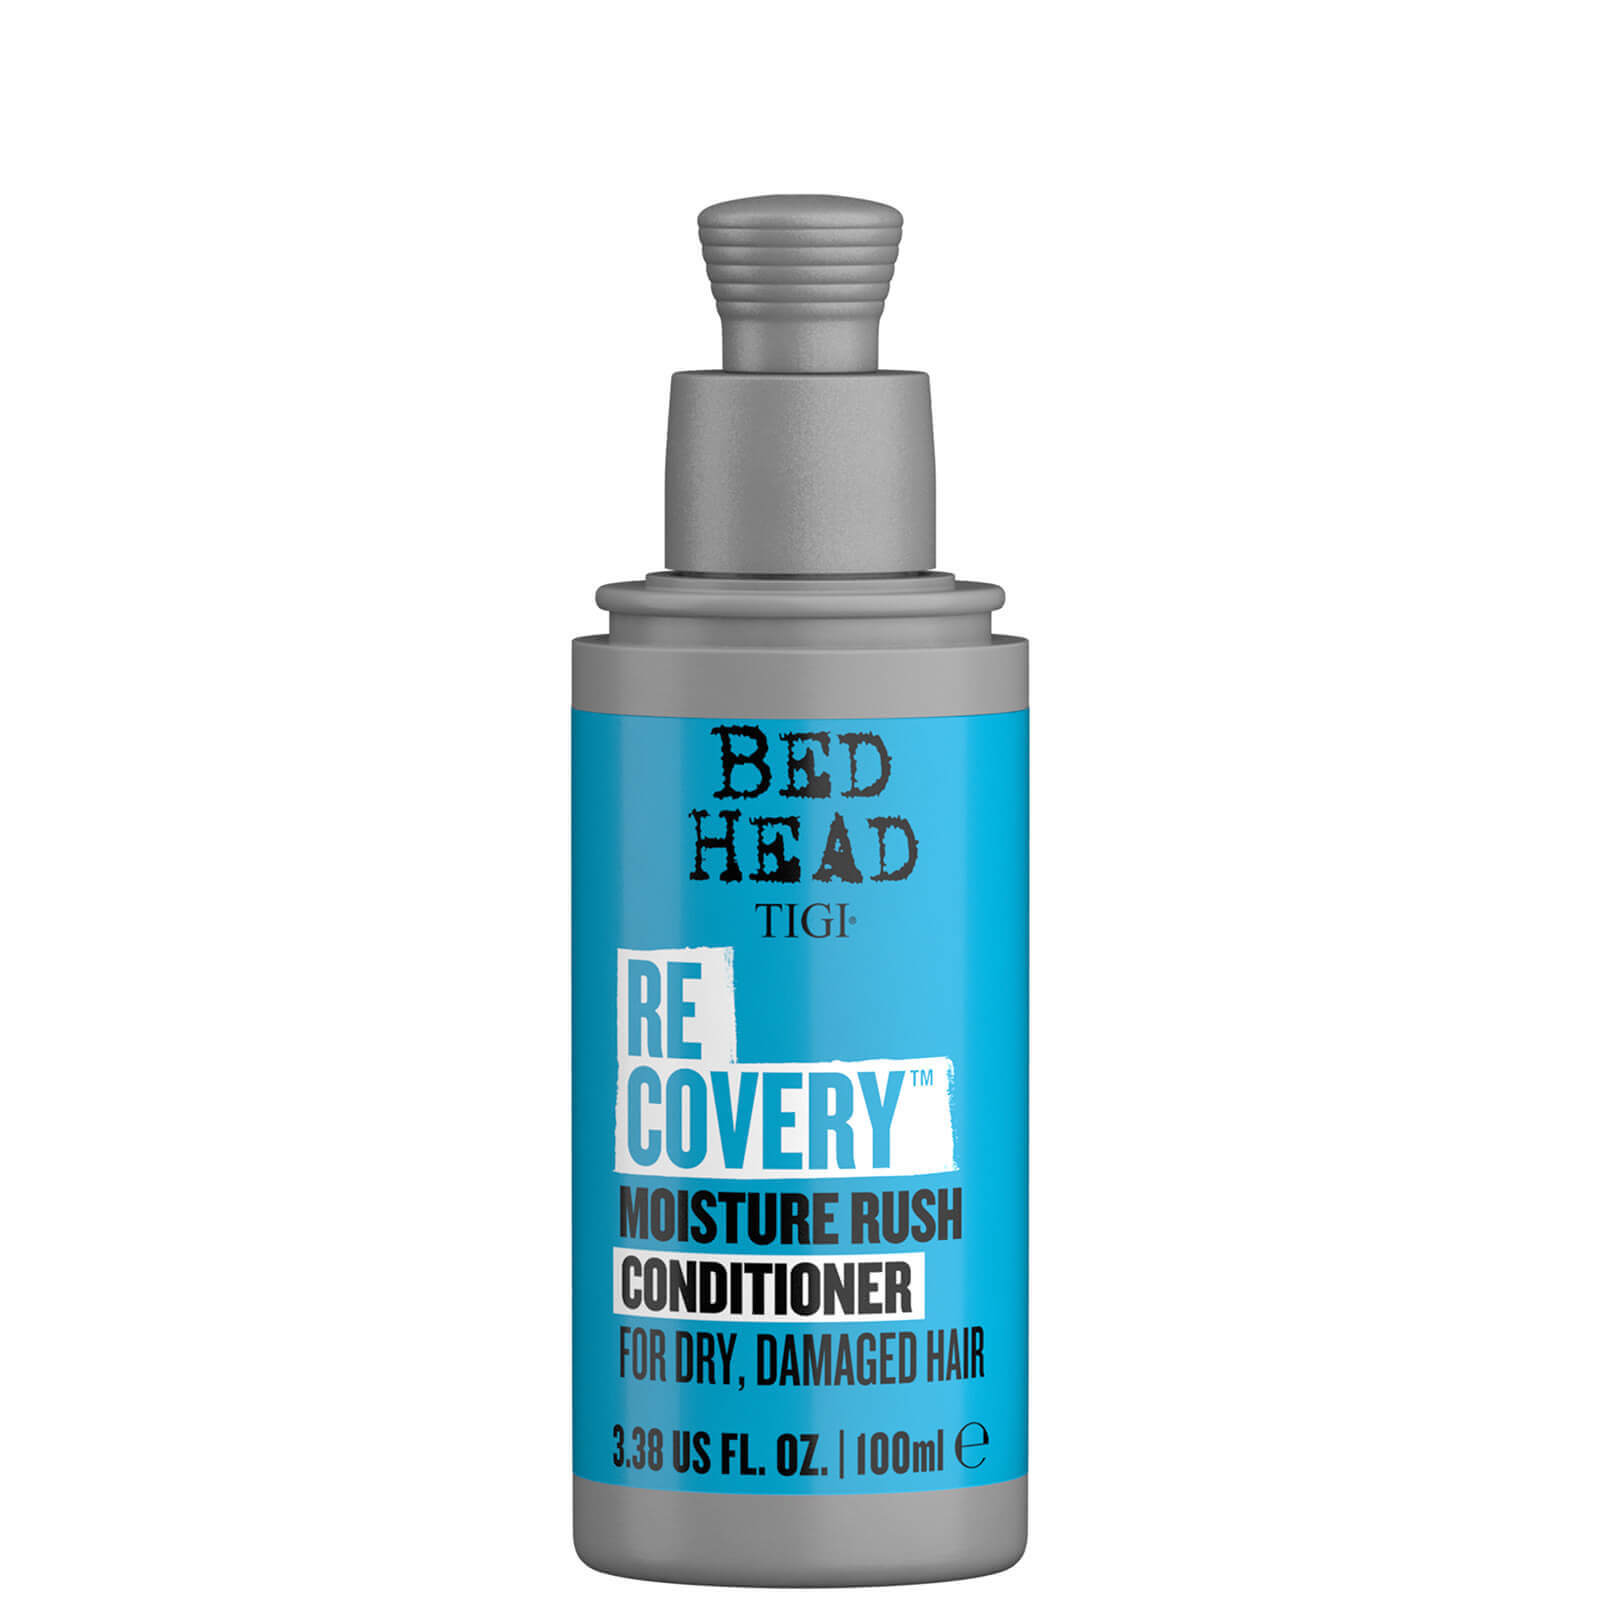 Photos - Hair Product TIGI Bed Head Recovery Moisturising Conditioner for Dry Hair Travel Size 1 